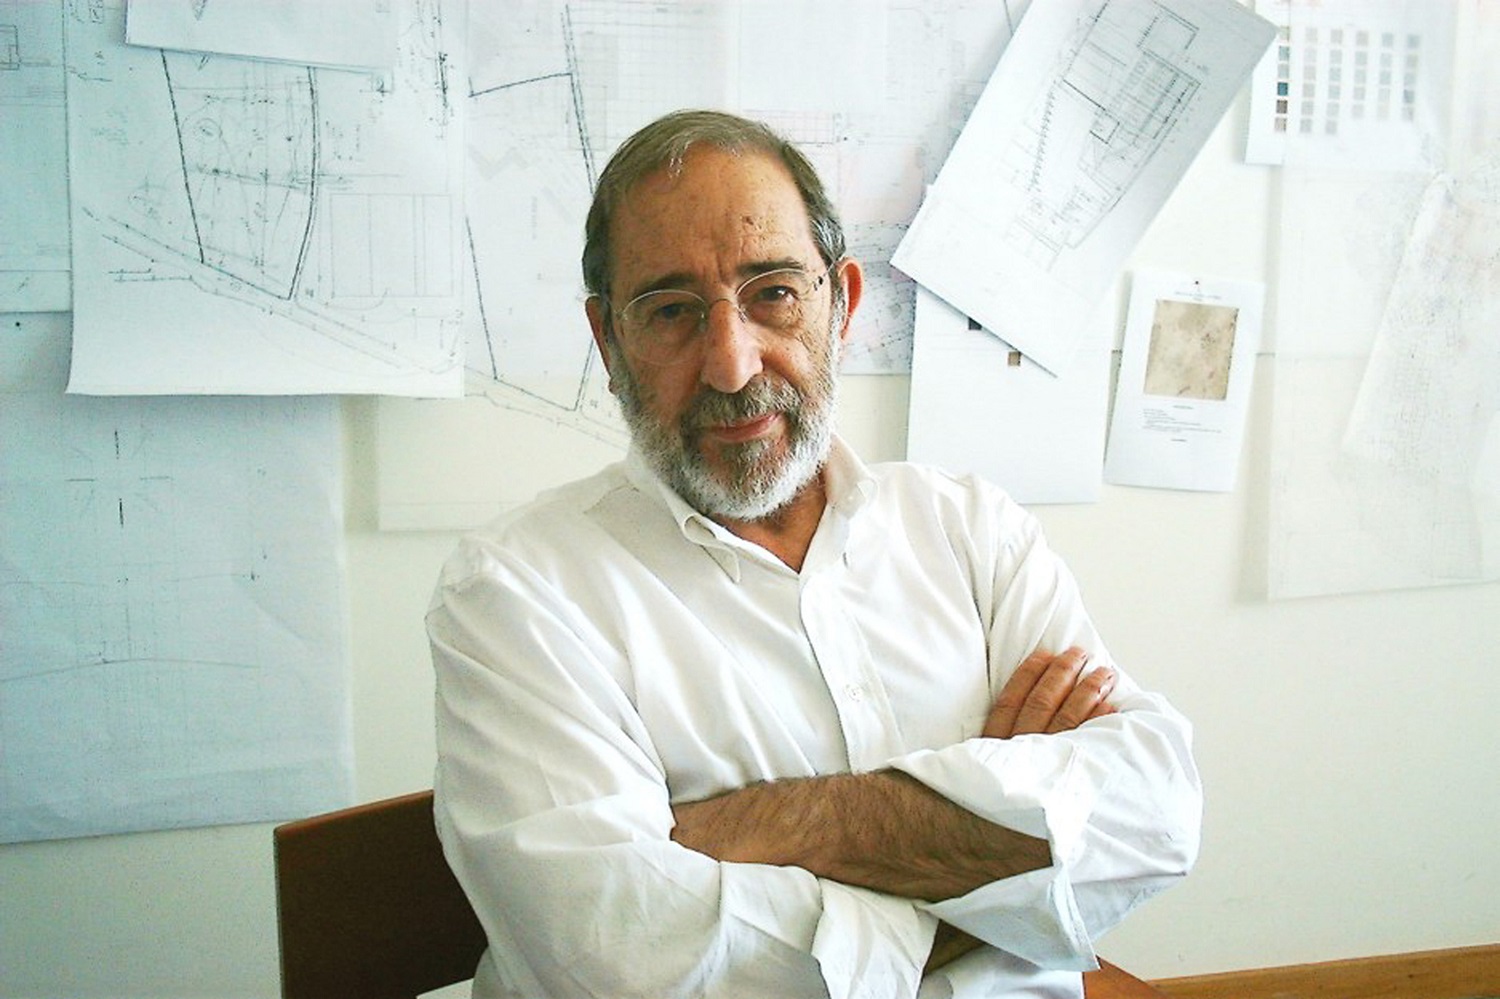 Álvaro Siza Vieira in a white shirt with building plans on a wall in the background